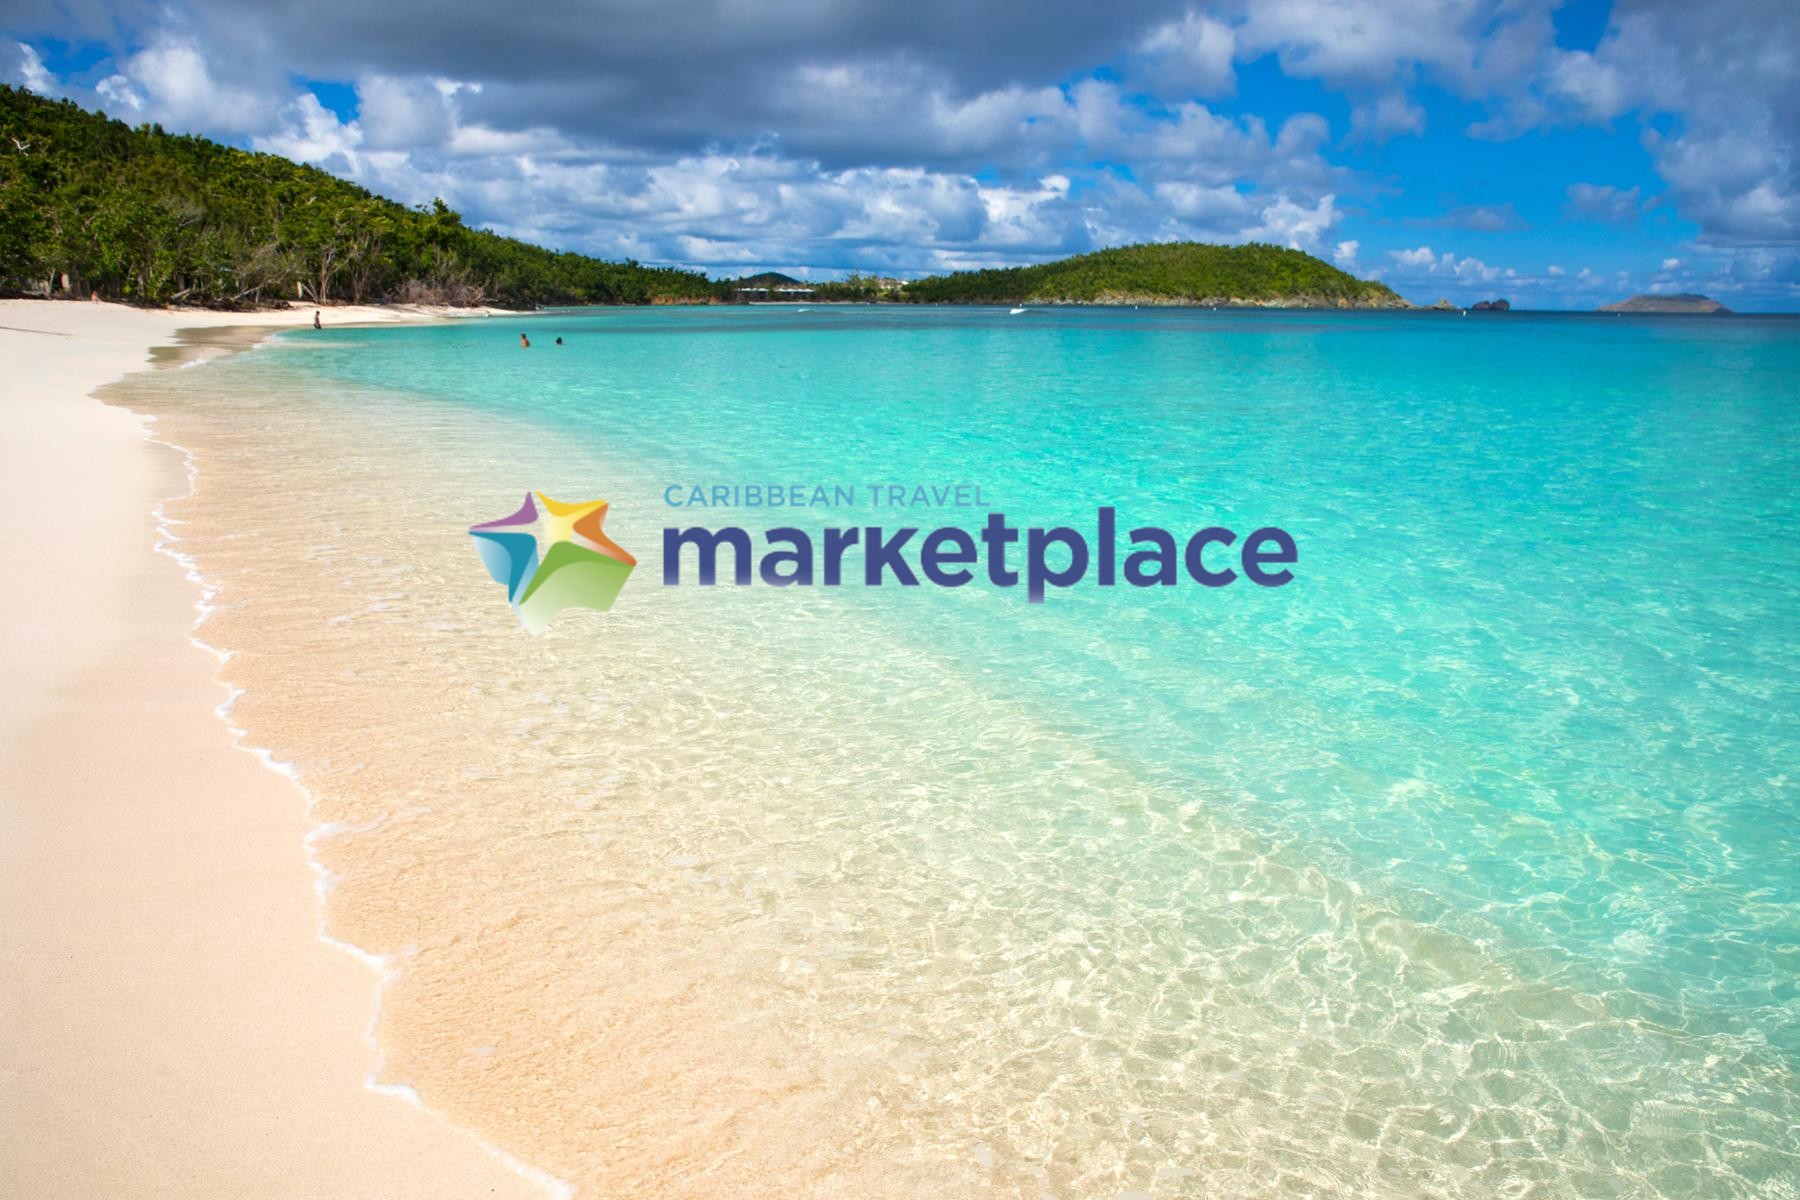 the sea on a beach and the Caribbean Travel Marketplace logo